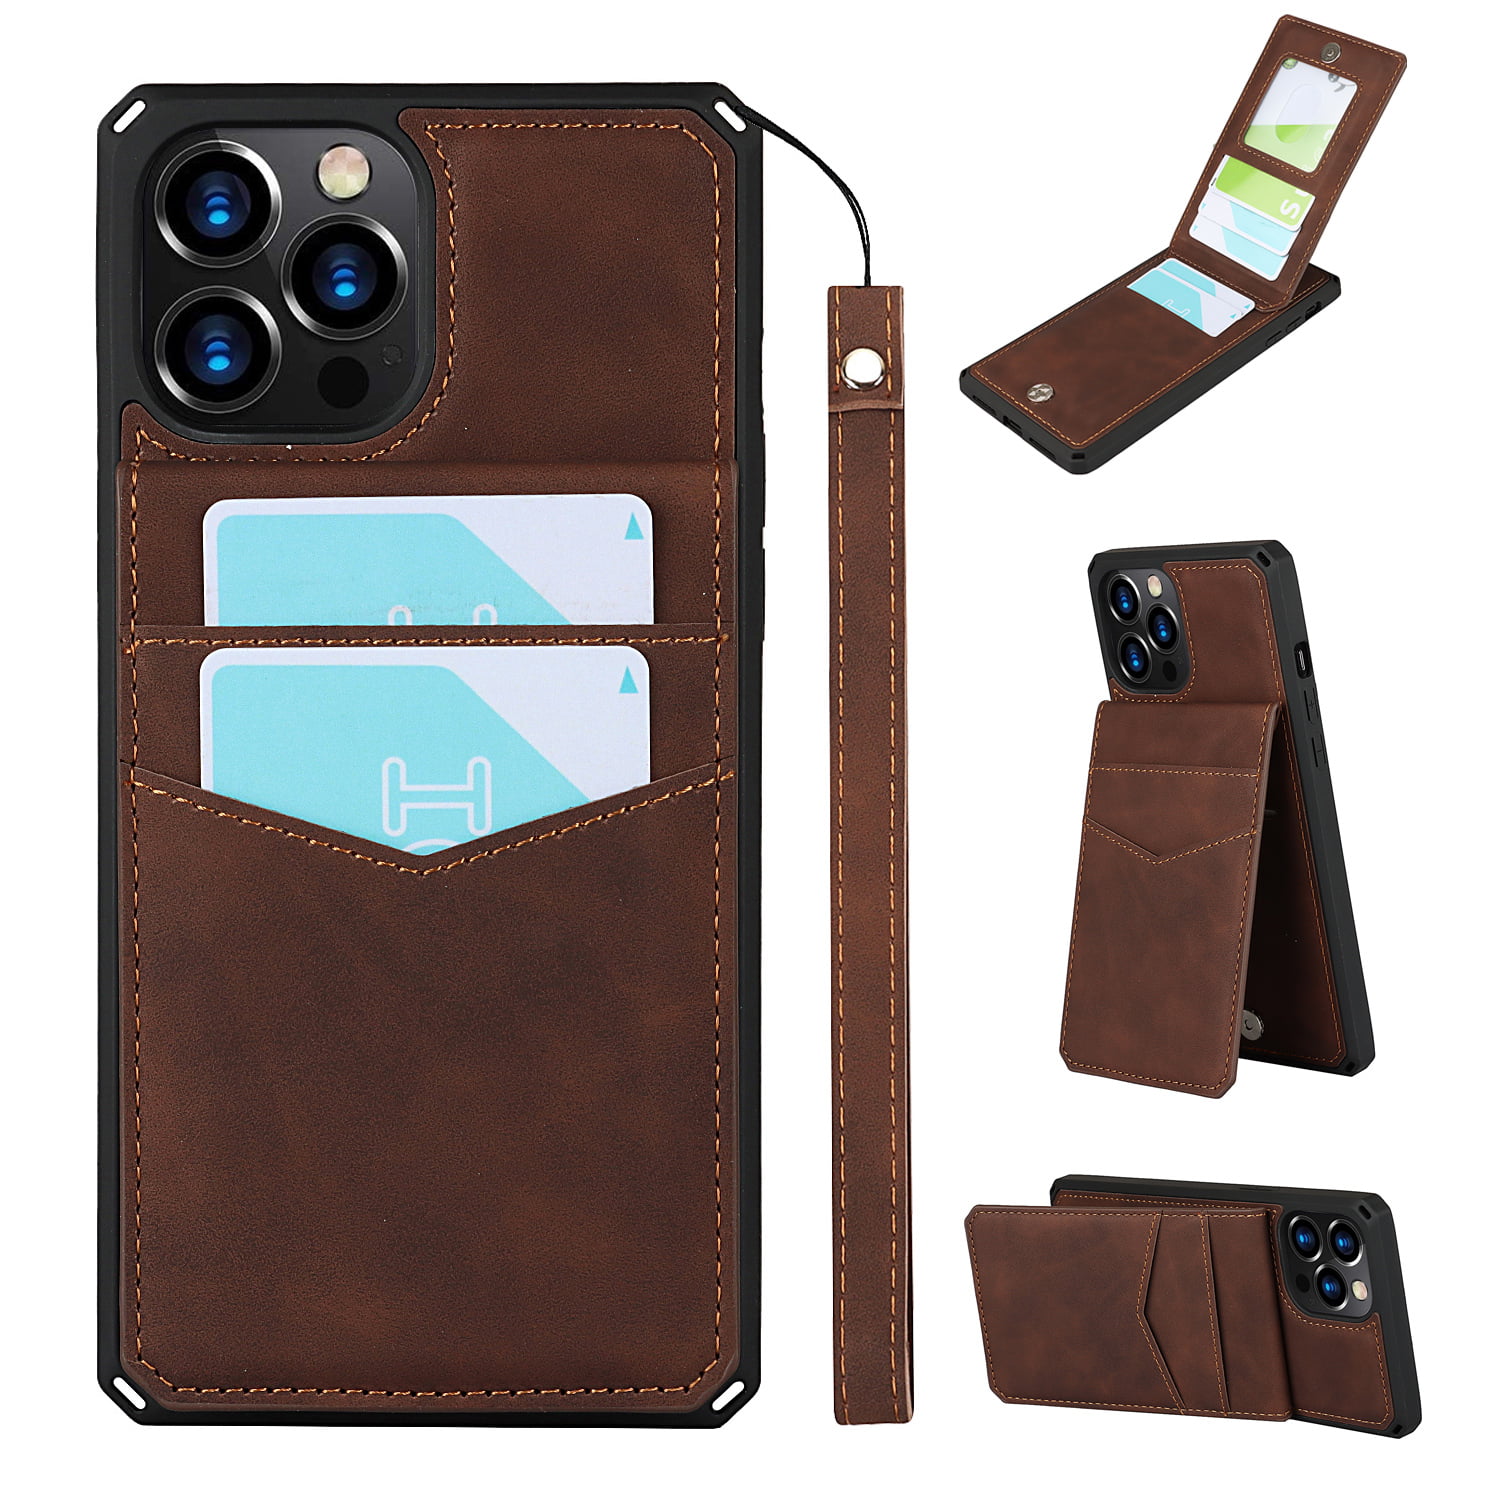 Allytech Case for iPhone 12 6.1 inch, Luxury Leather Women Wallet